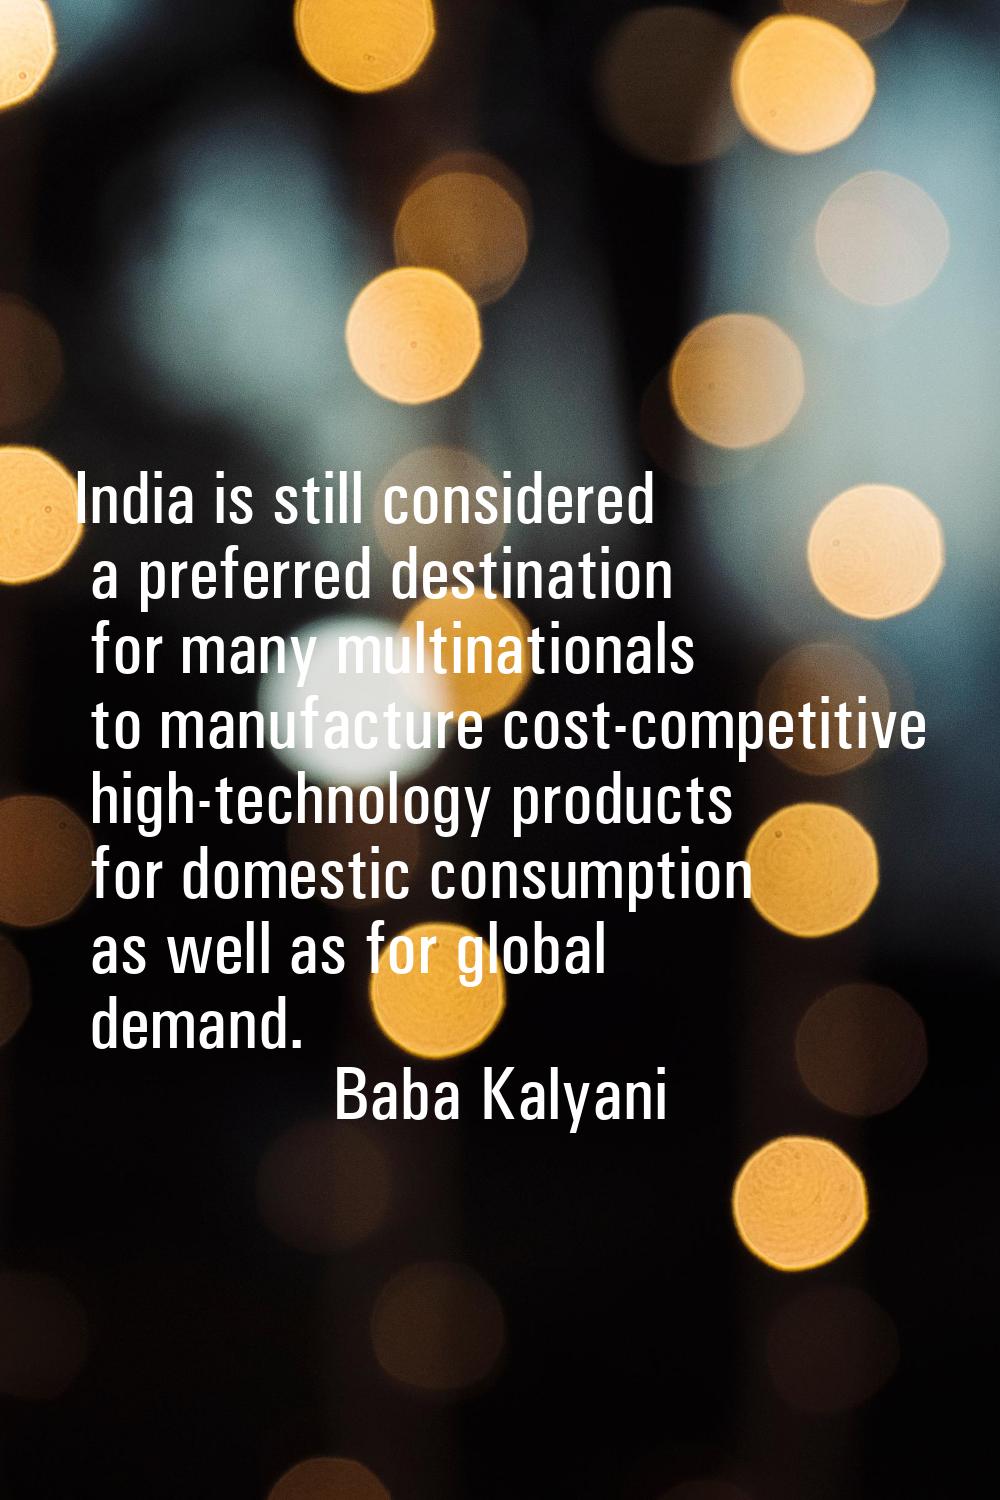 India is still considered a preferred destination for many multinationals to manufacture cost-compe